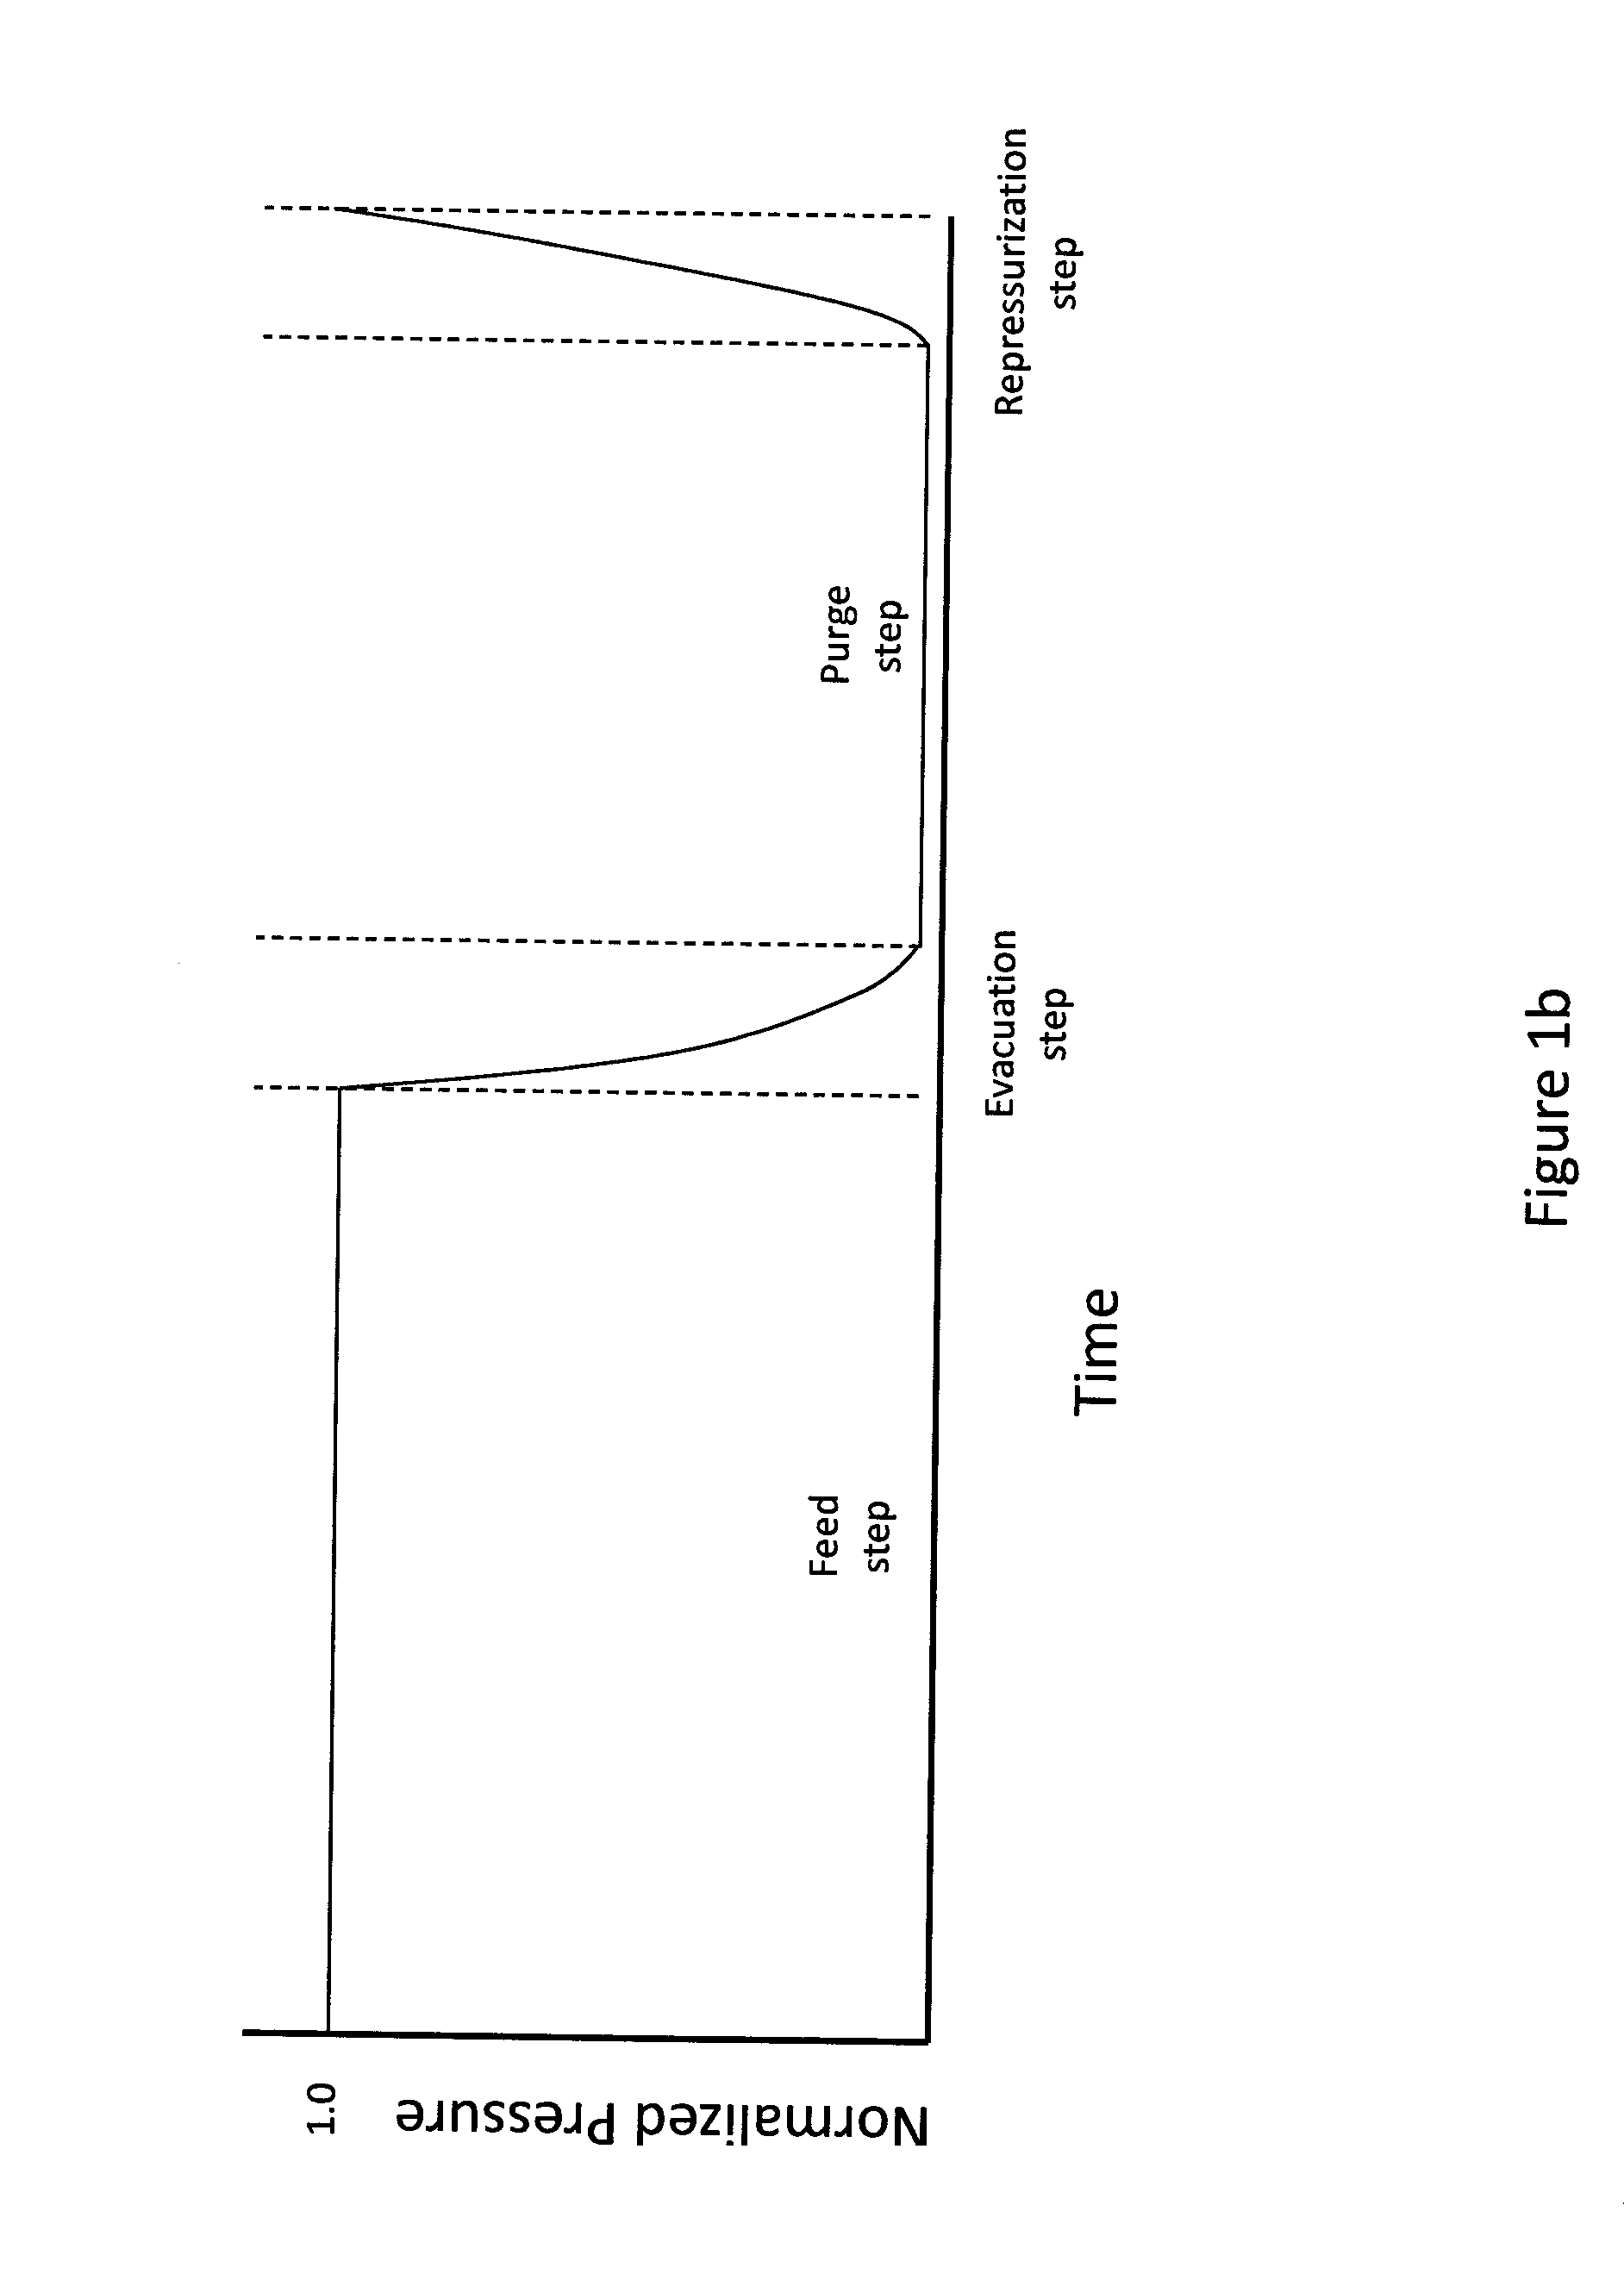 Recovering of xenon by adsorption process